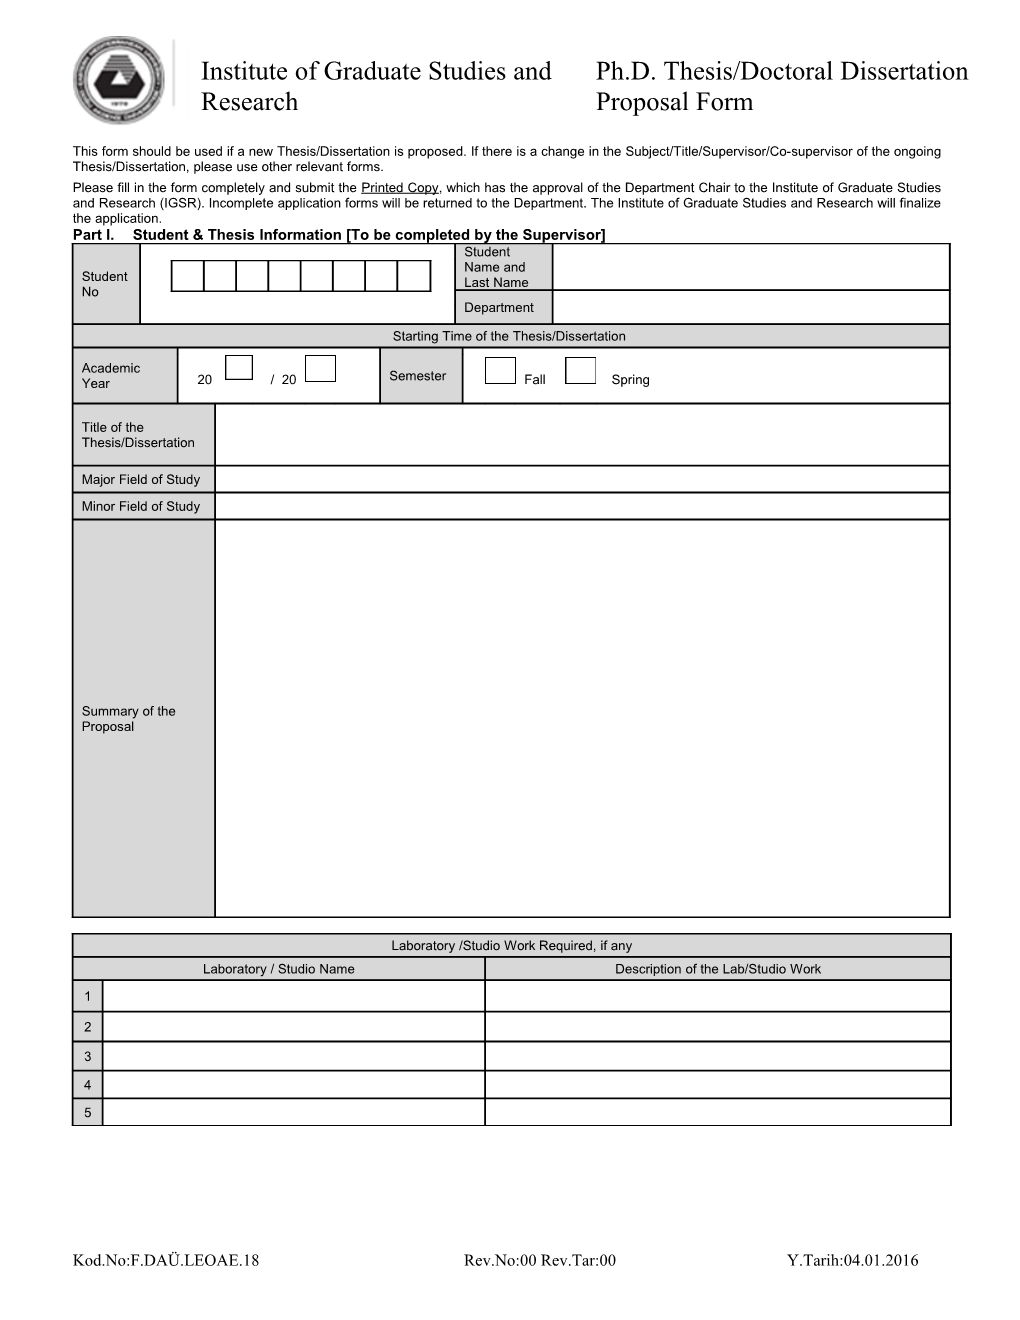 Thesis/Dissertation Proposal and Supervisor Appointment Form